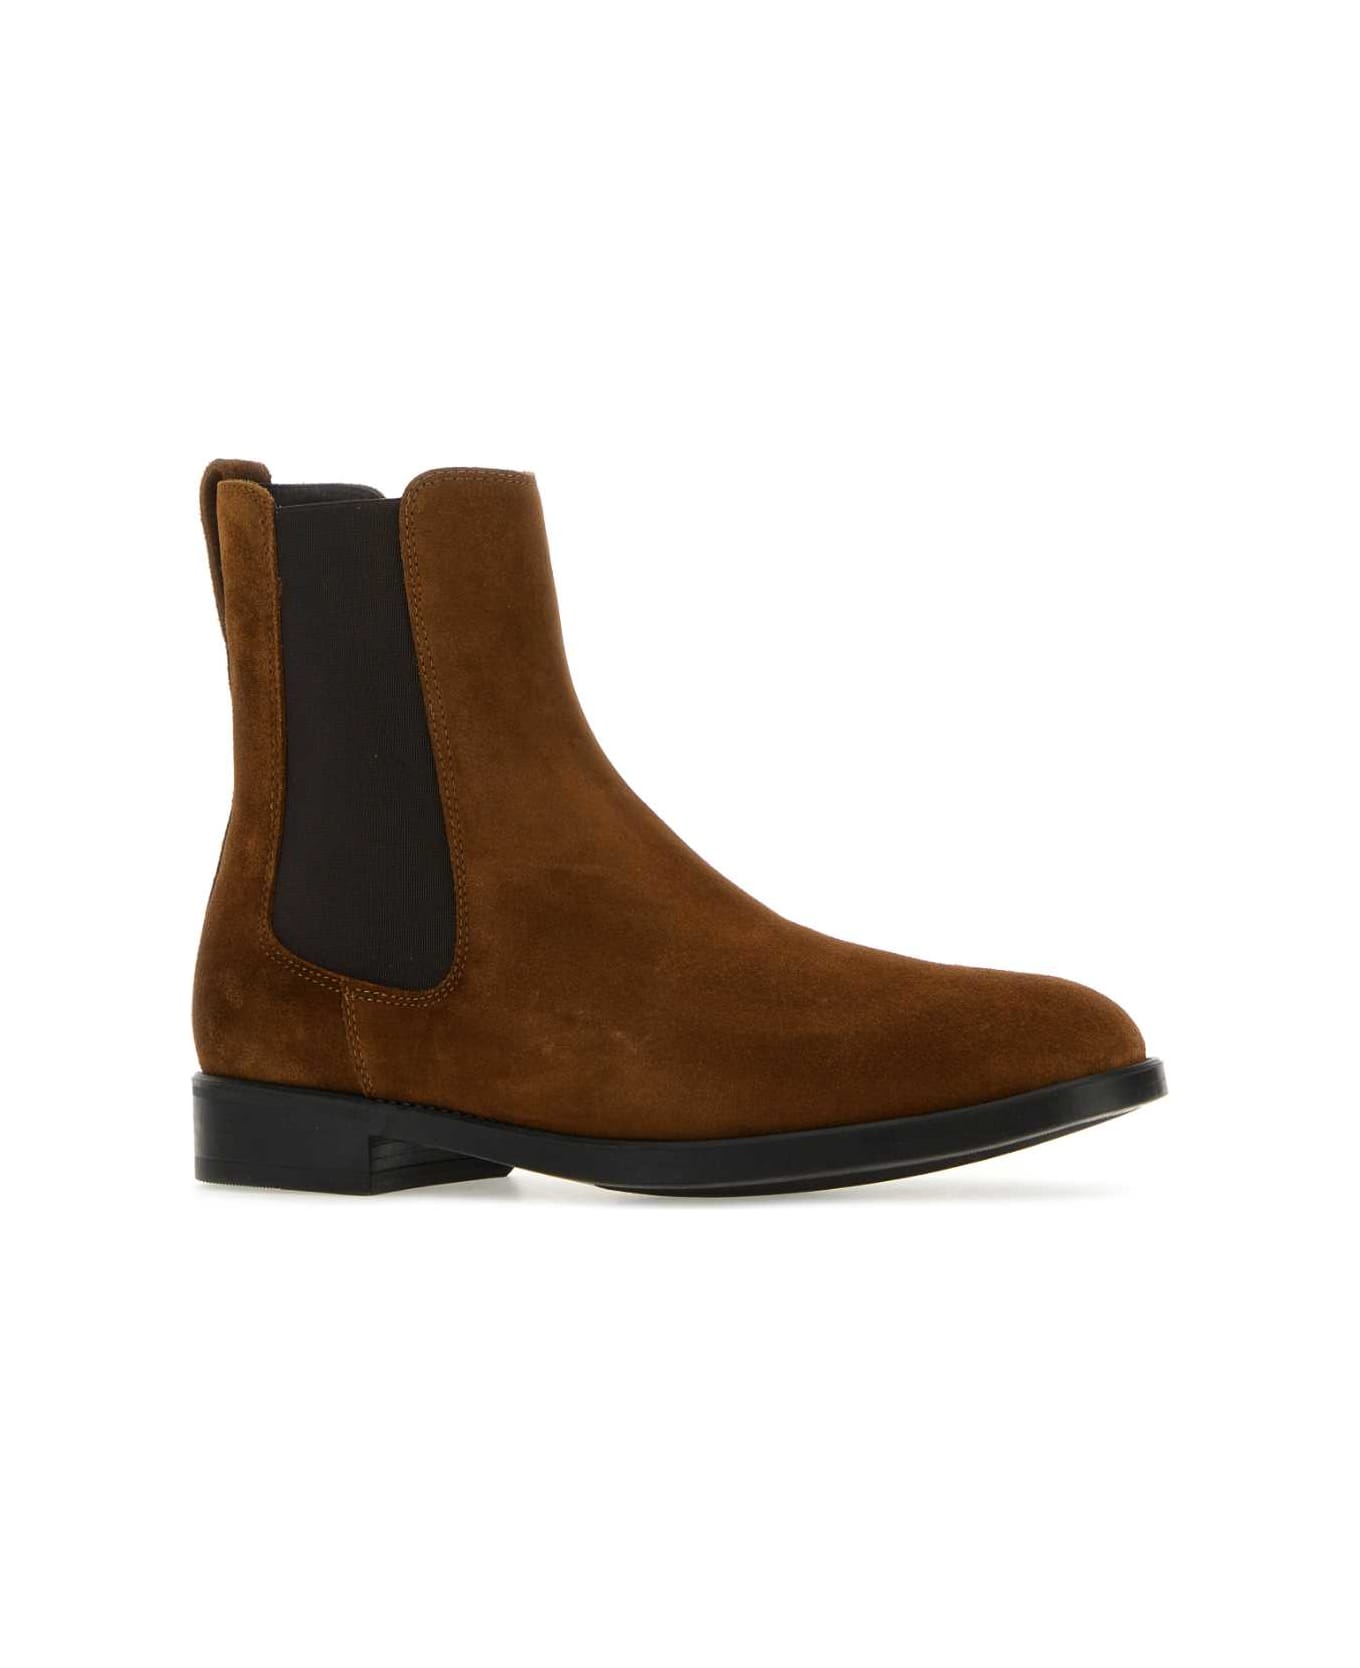 Tom Ford Caramel Suede Ankle Boots - TOBACCO ブーツ